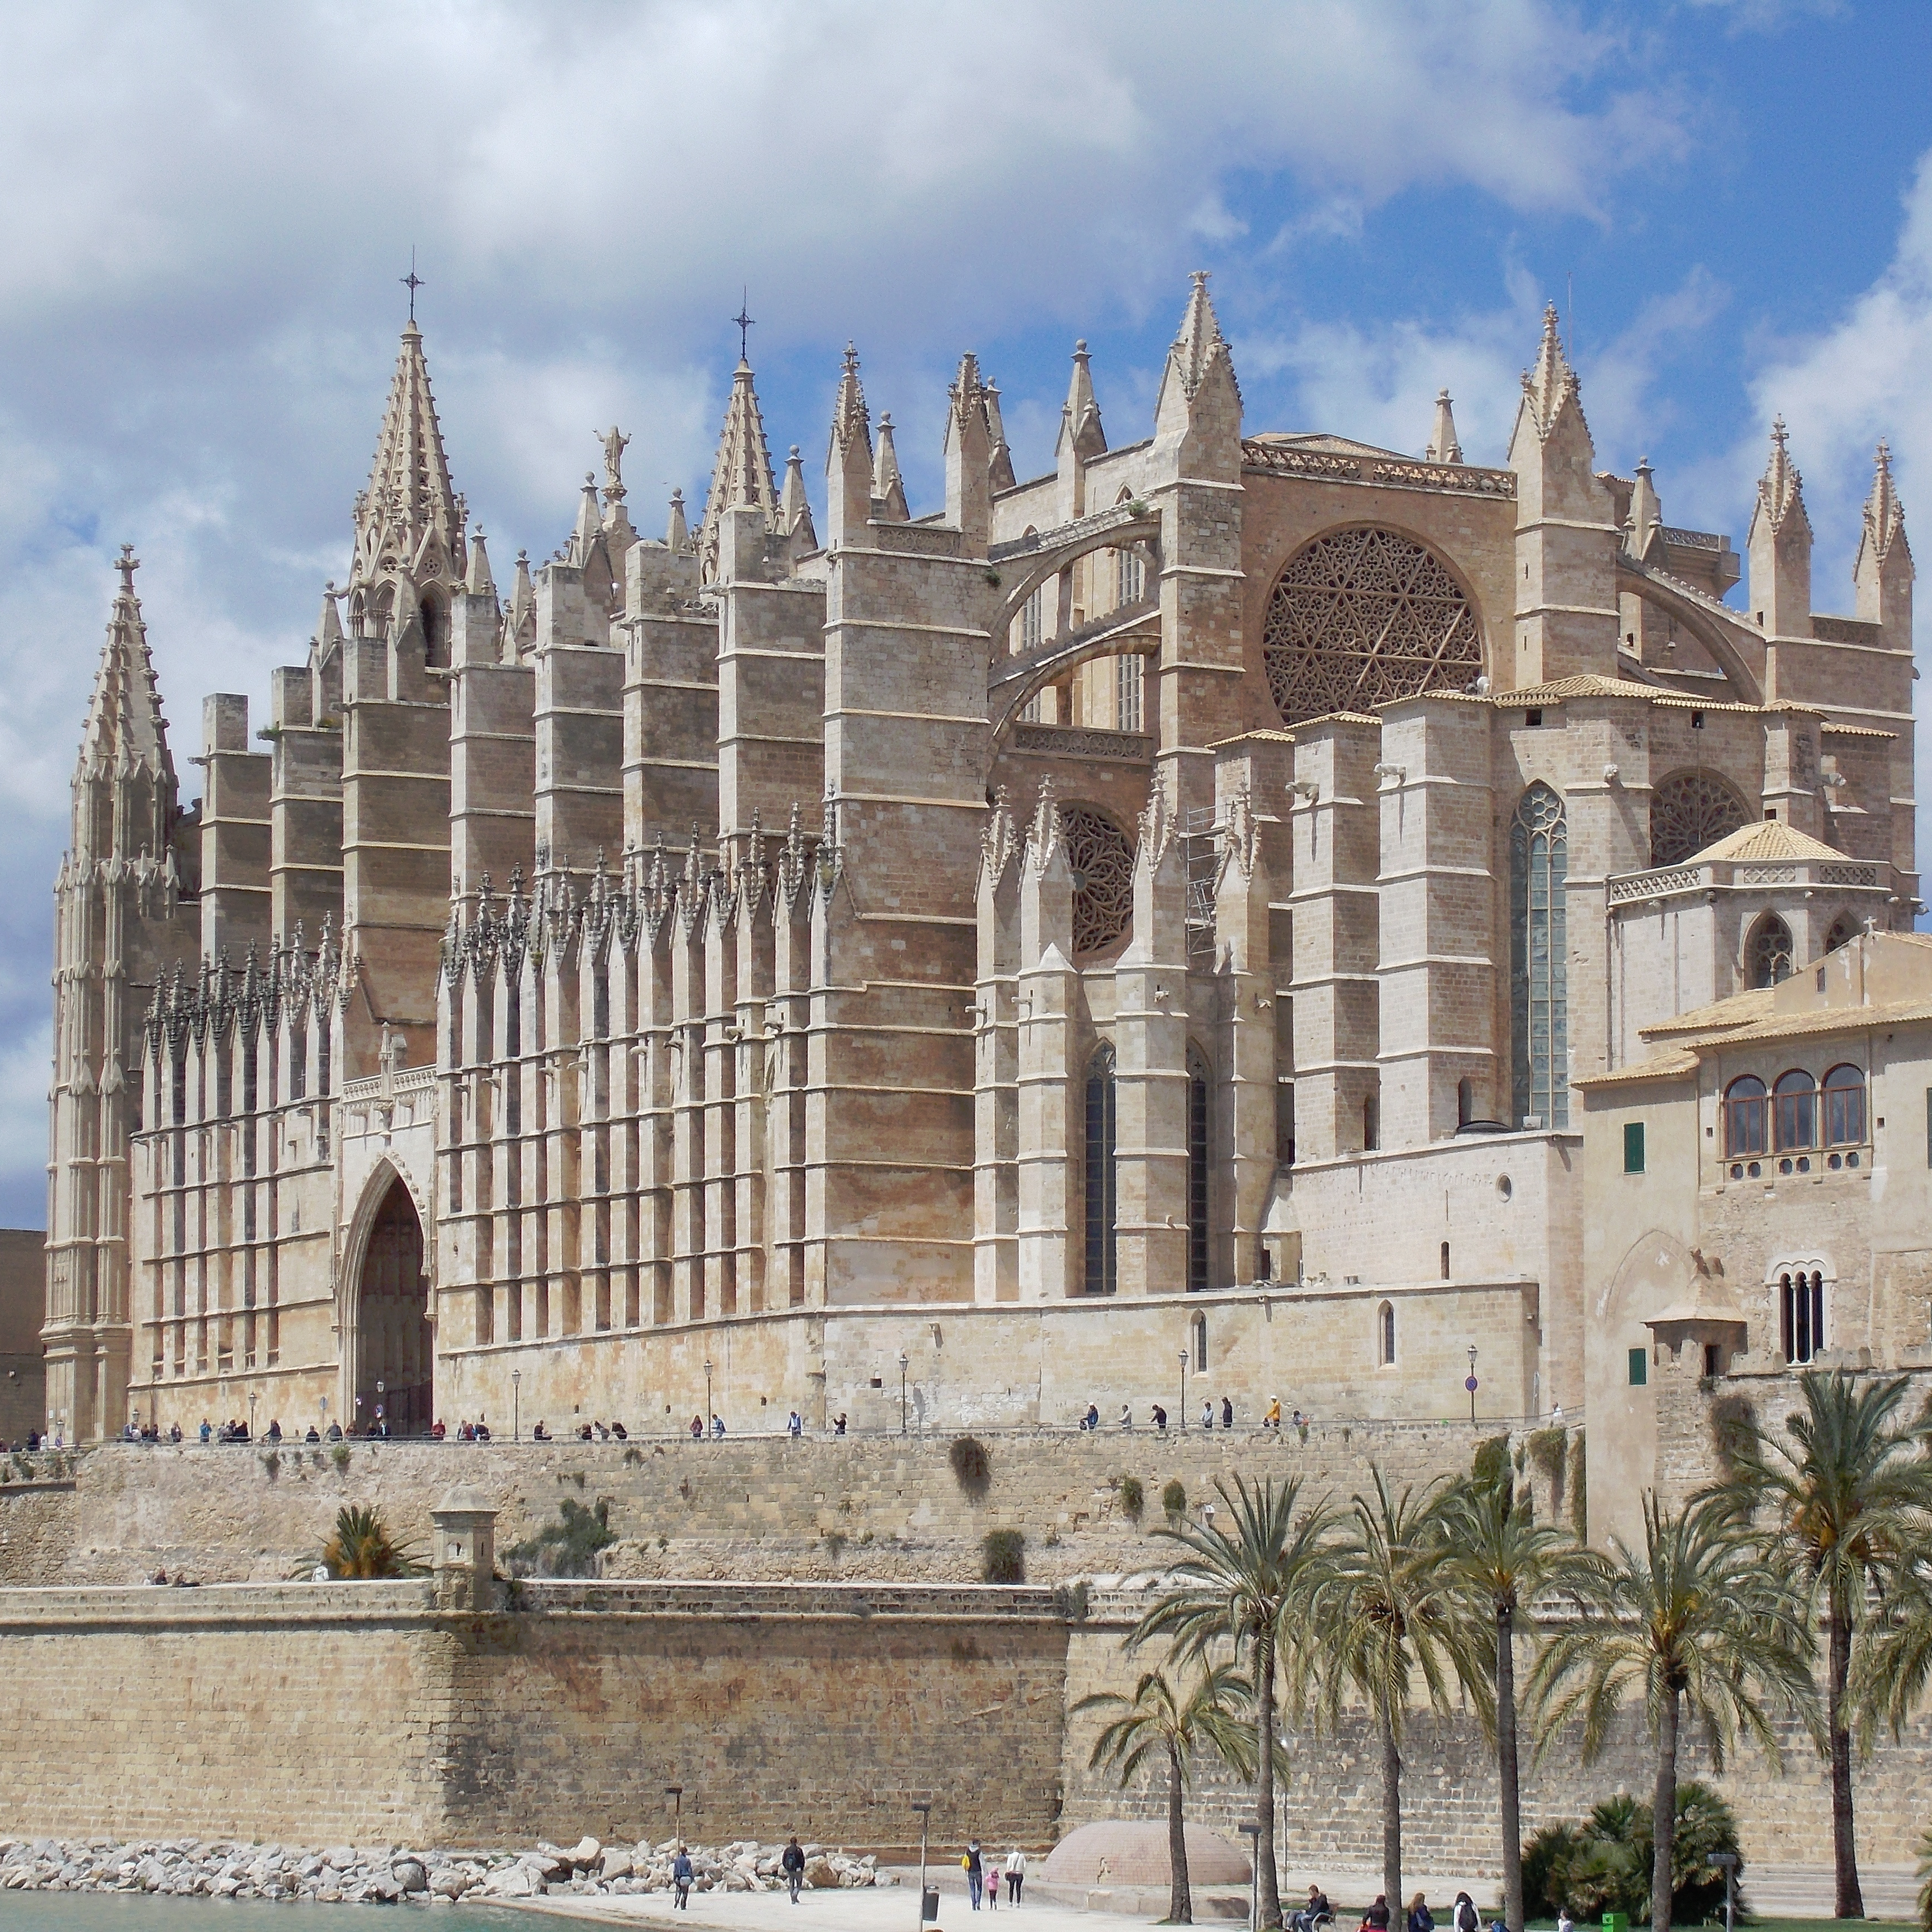 The 13th-century Gothic Roman Catholic cathedral called La Seu, or the Cathedral of Santa Maria of Palma, is a major landmark in Mallorca.